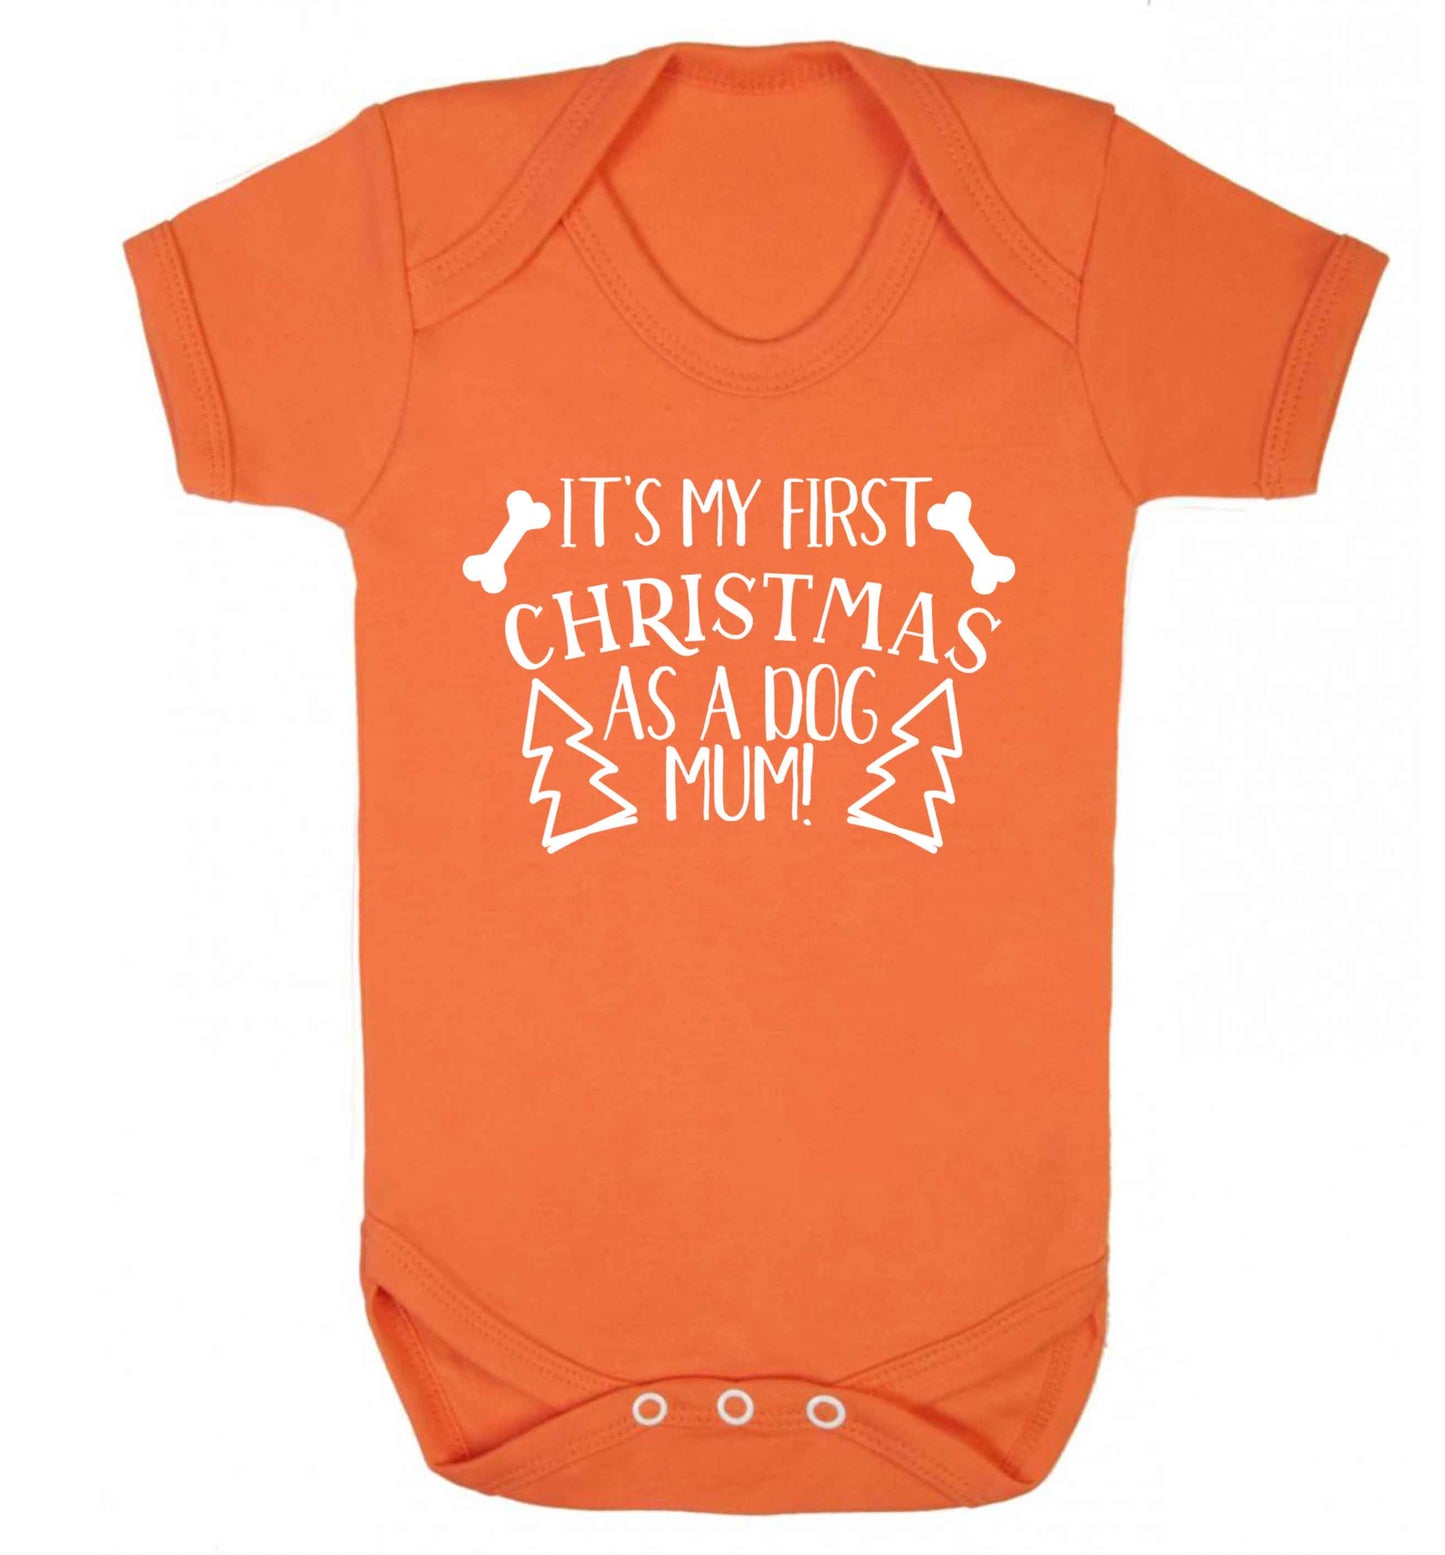 It's my first Christmas as a dog mum! Baby Vest orange 18-24 months